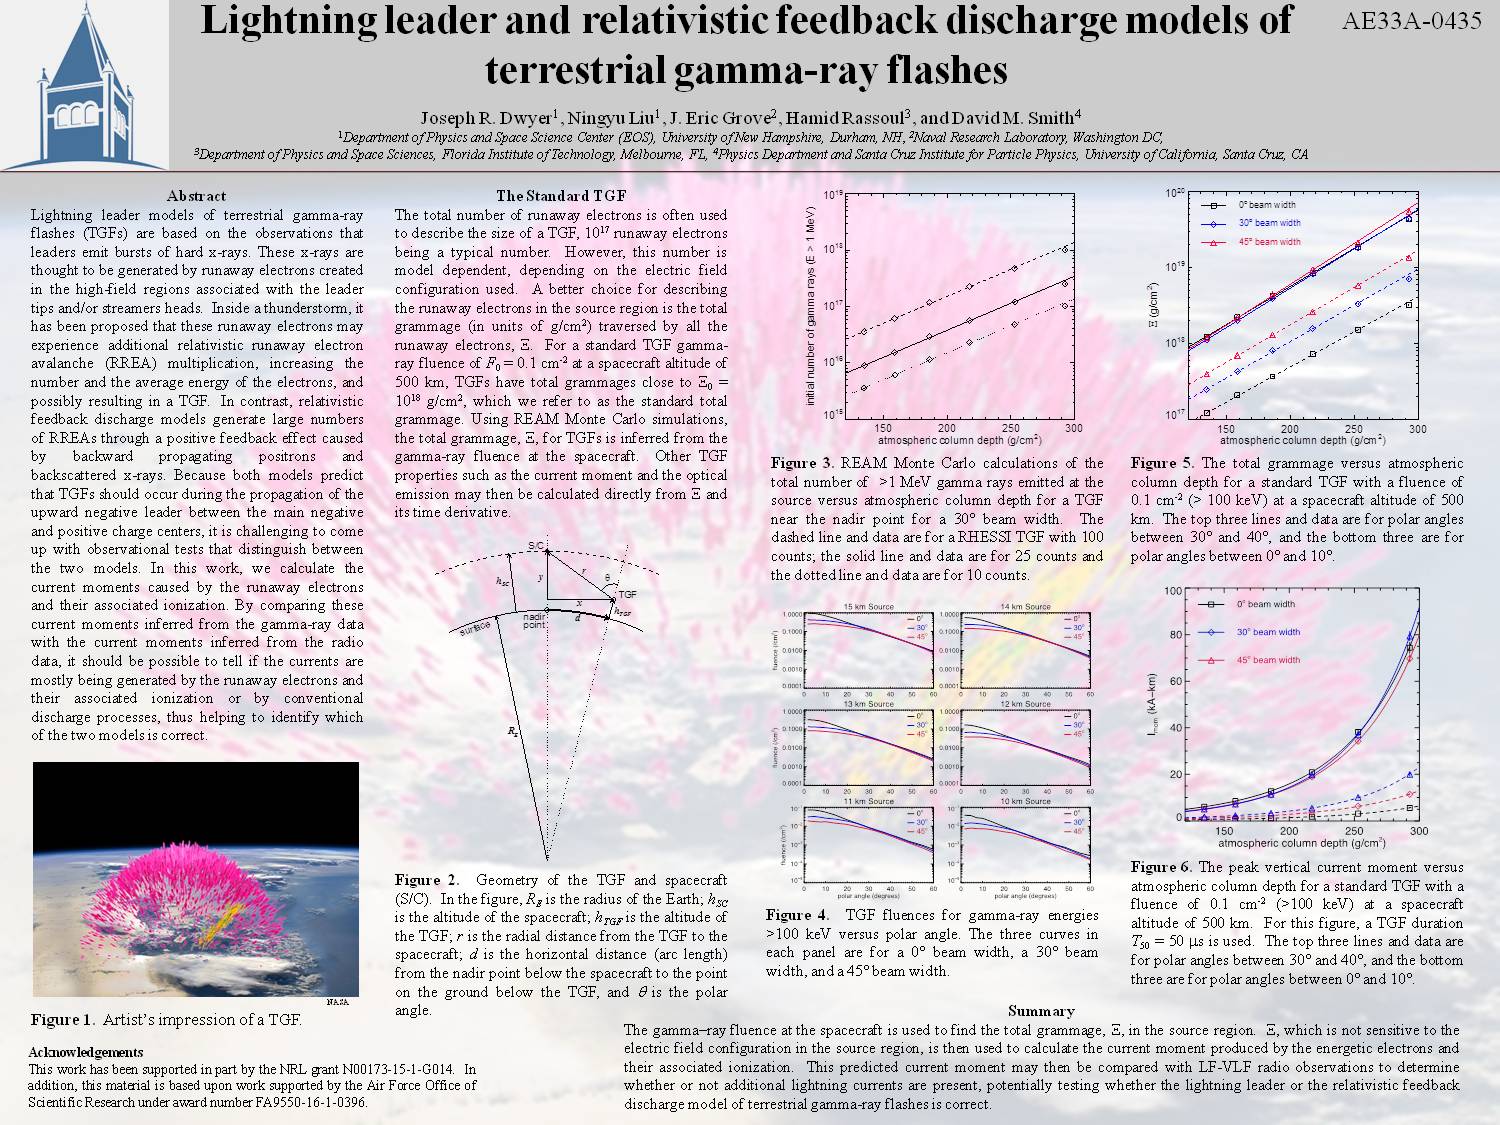 Lightning Leader And Relativistic Feedback Discharge Models Of Terrestrial Gamma-Ray Flashes by jrd1002